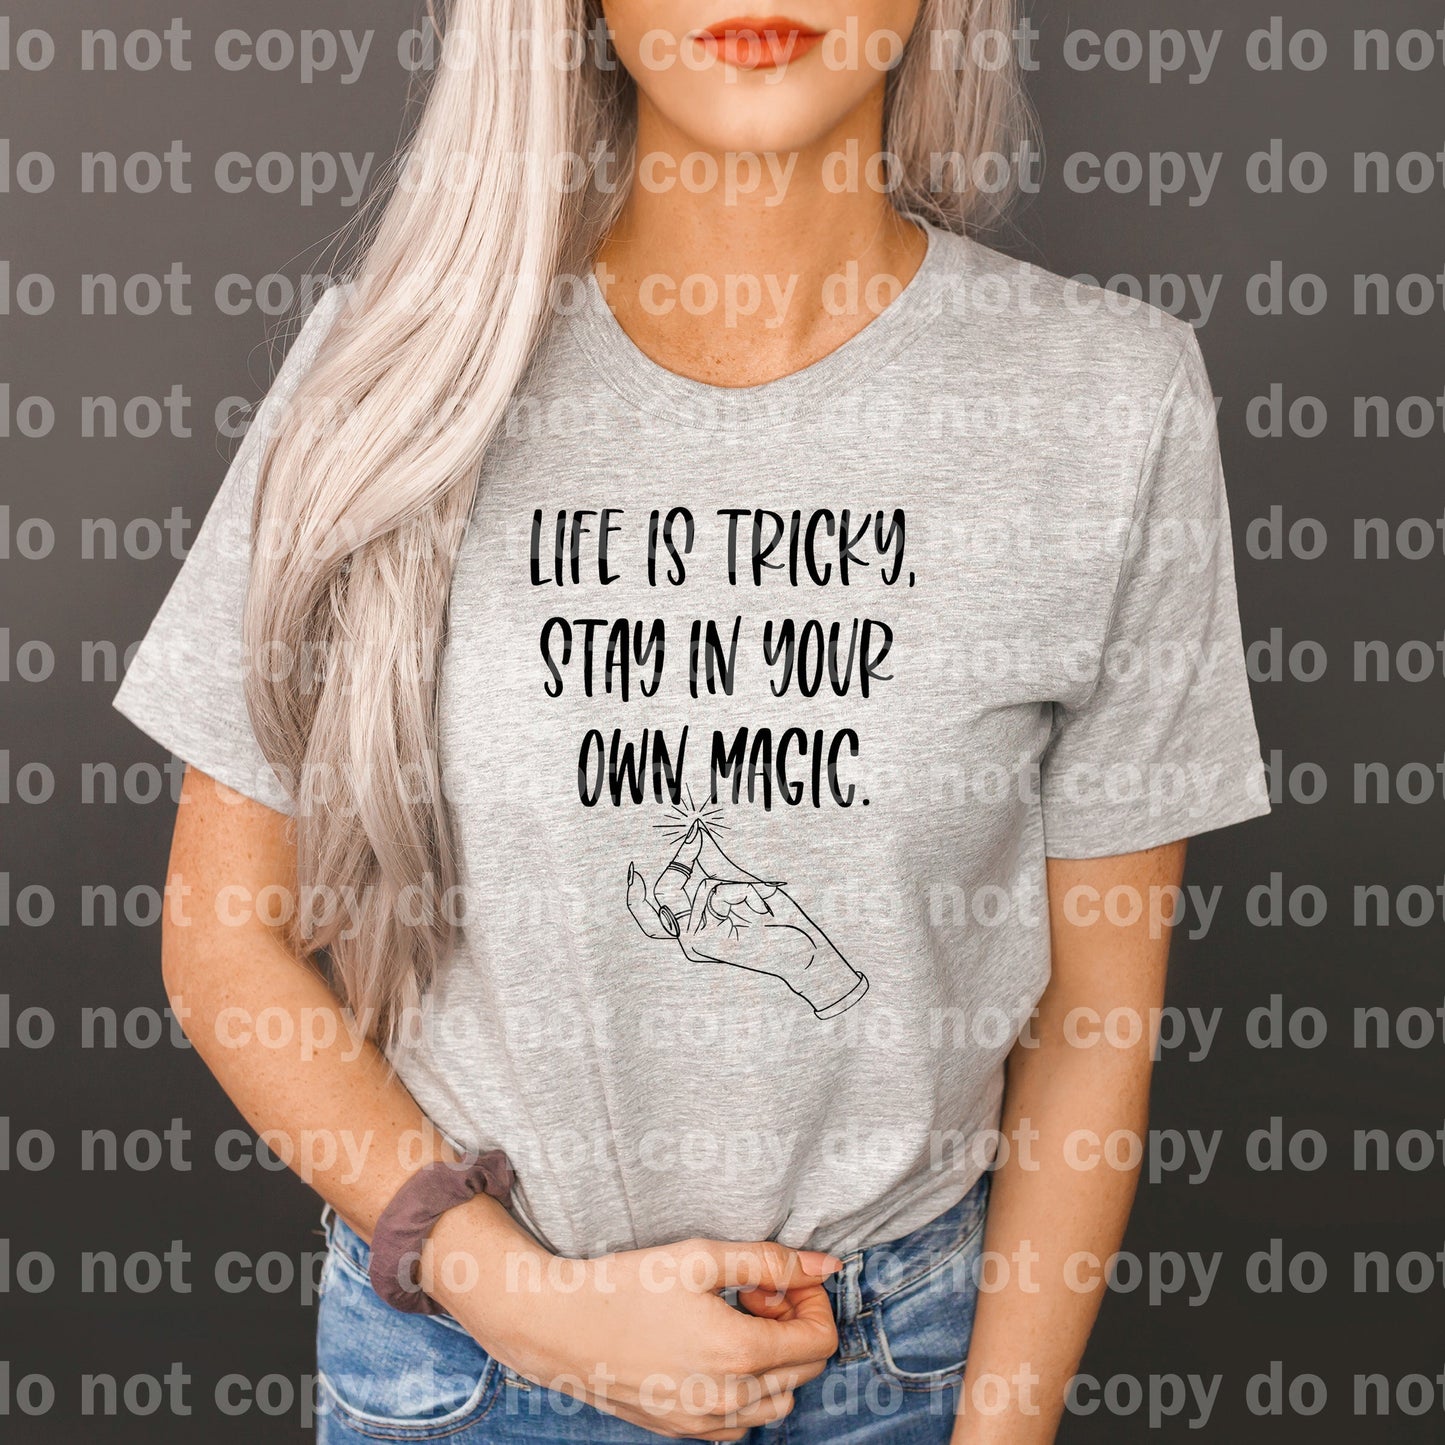 Life Is Tricky Stay In Your Own Magic Dream Print or Sublimation Print